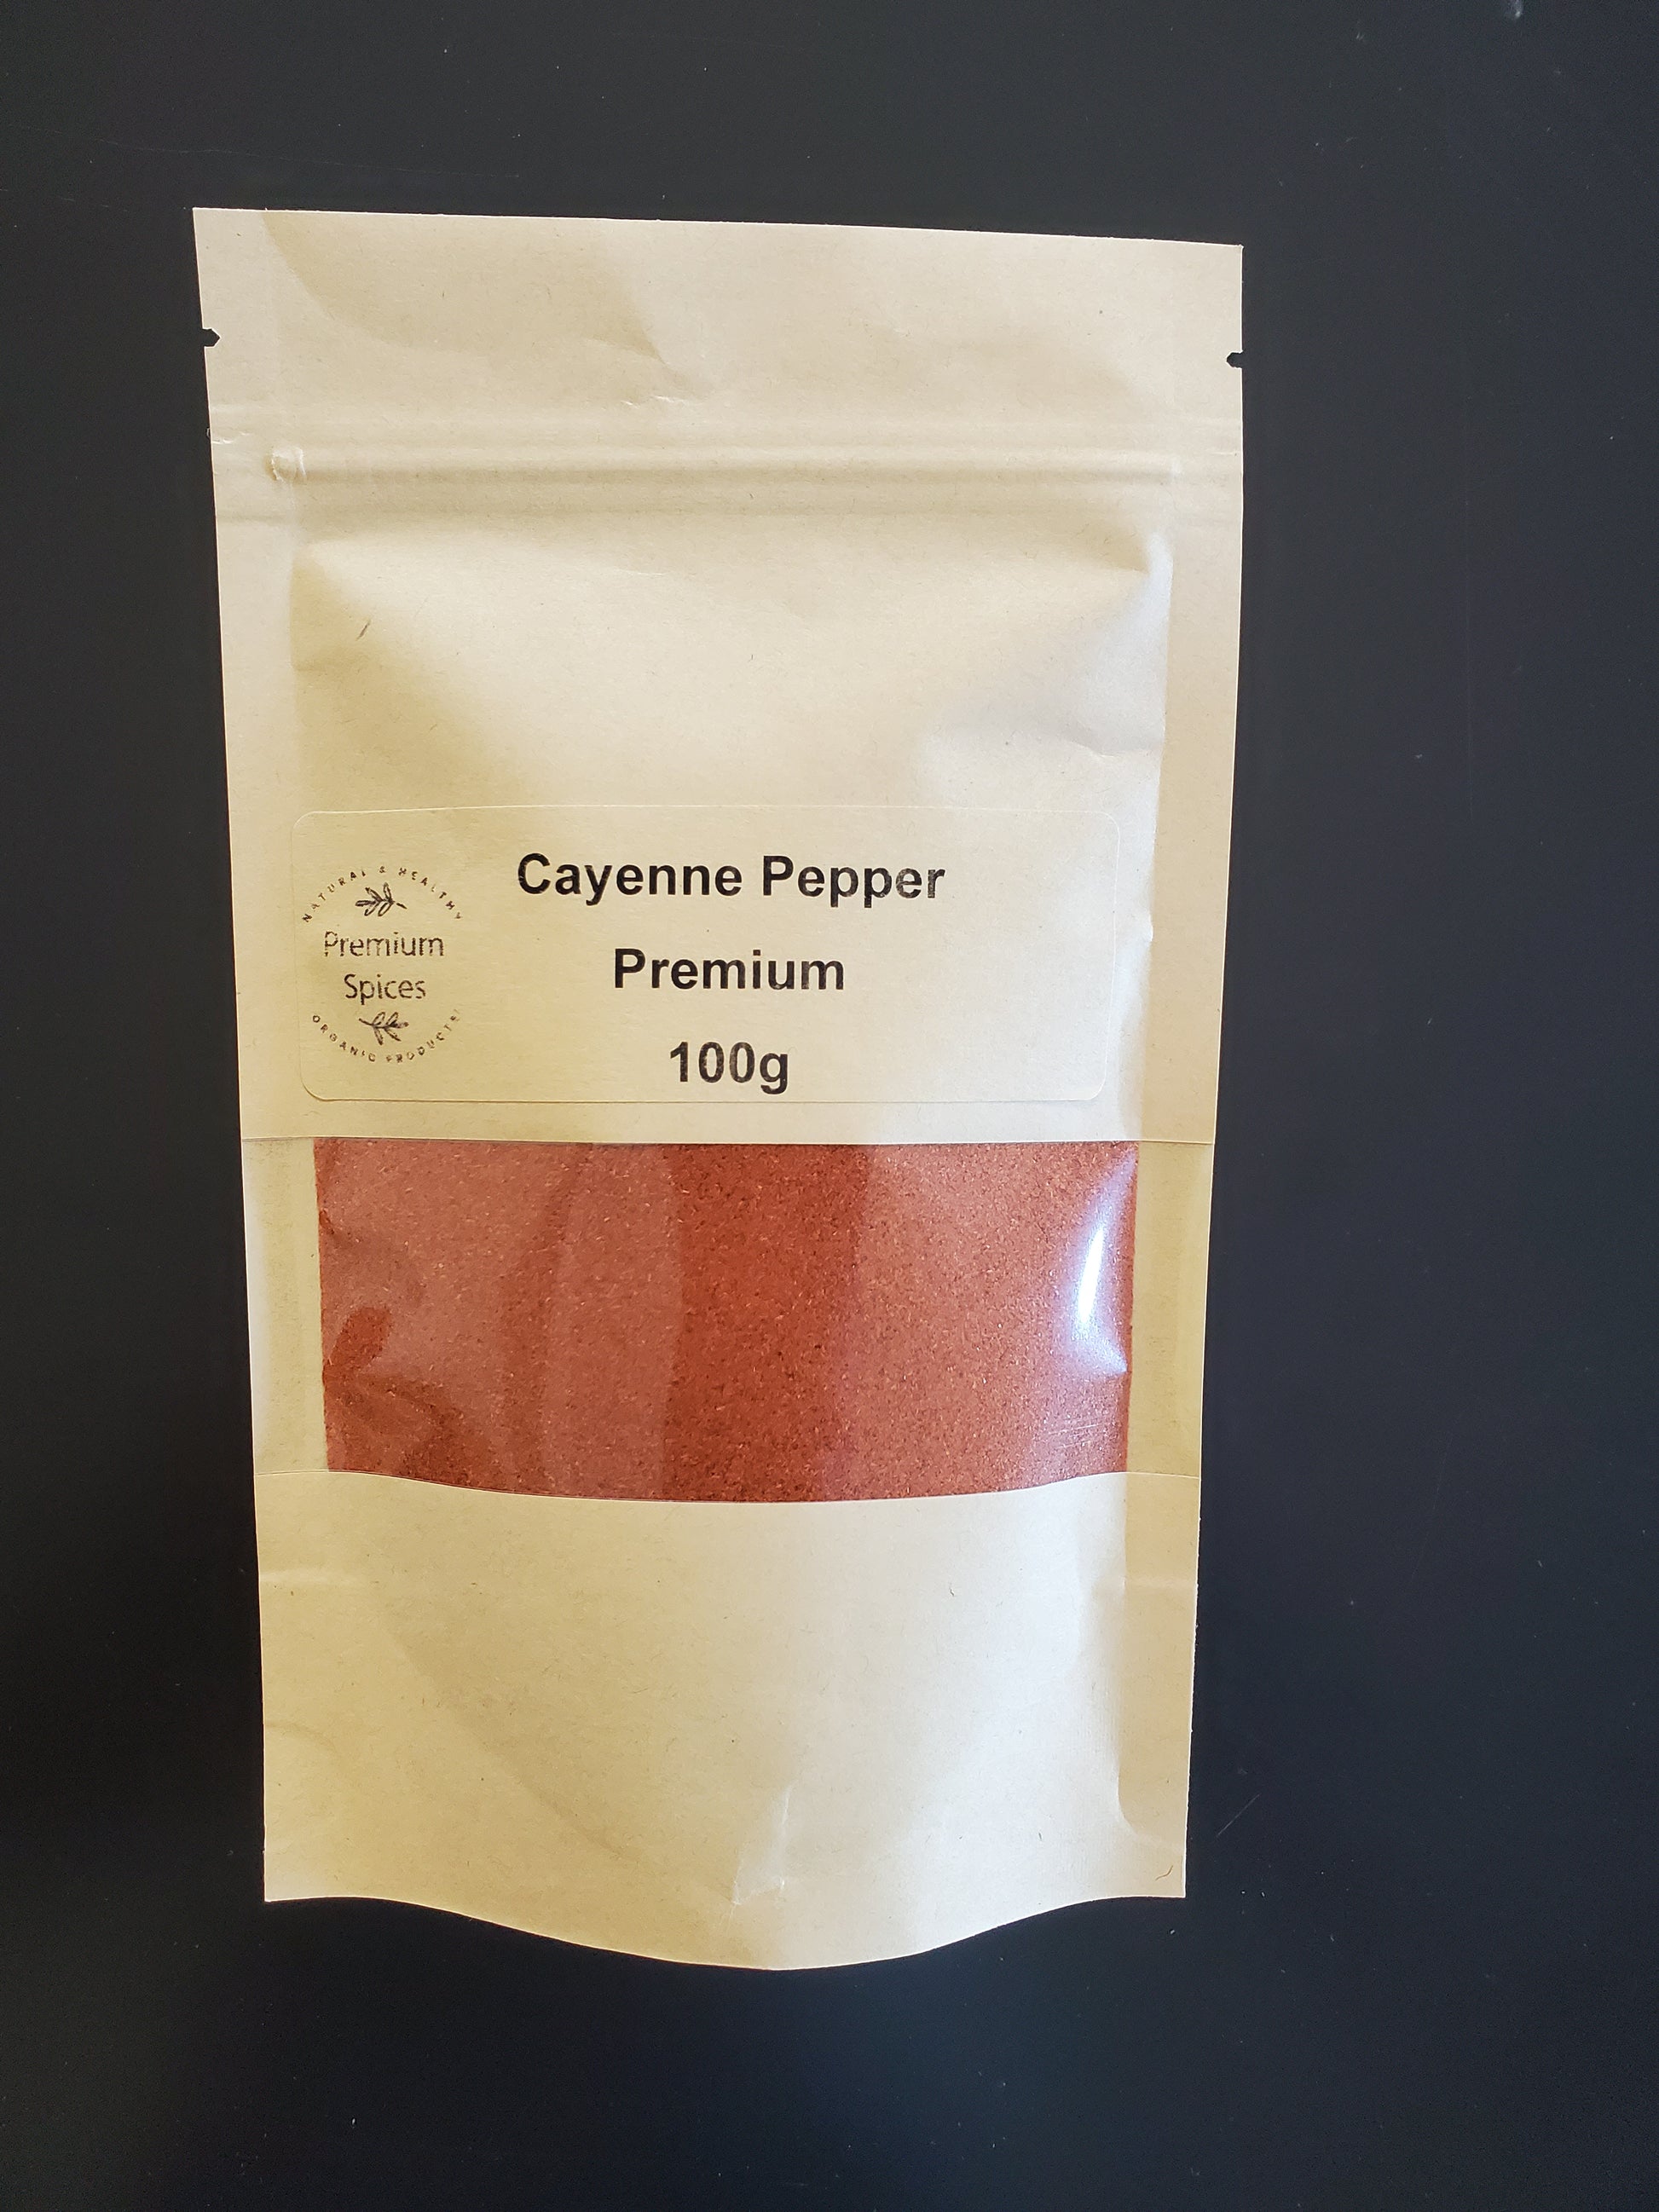 Premium Spices highest quality premium cayenne pepper in NZ, showing a 100g eco friendly pack 